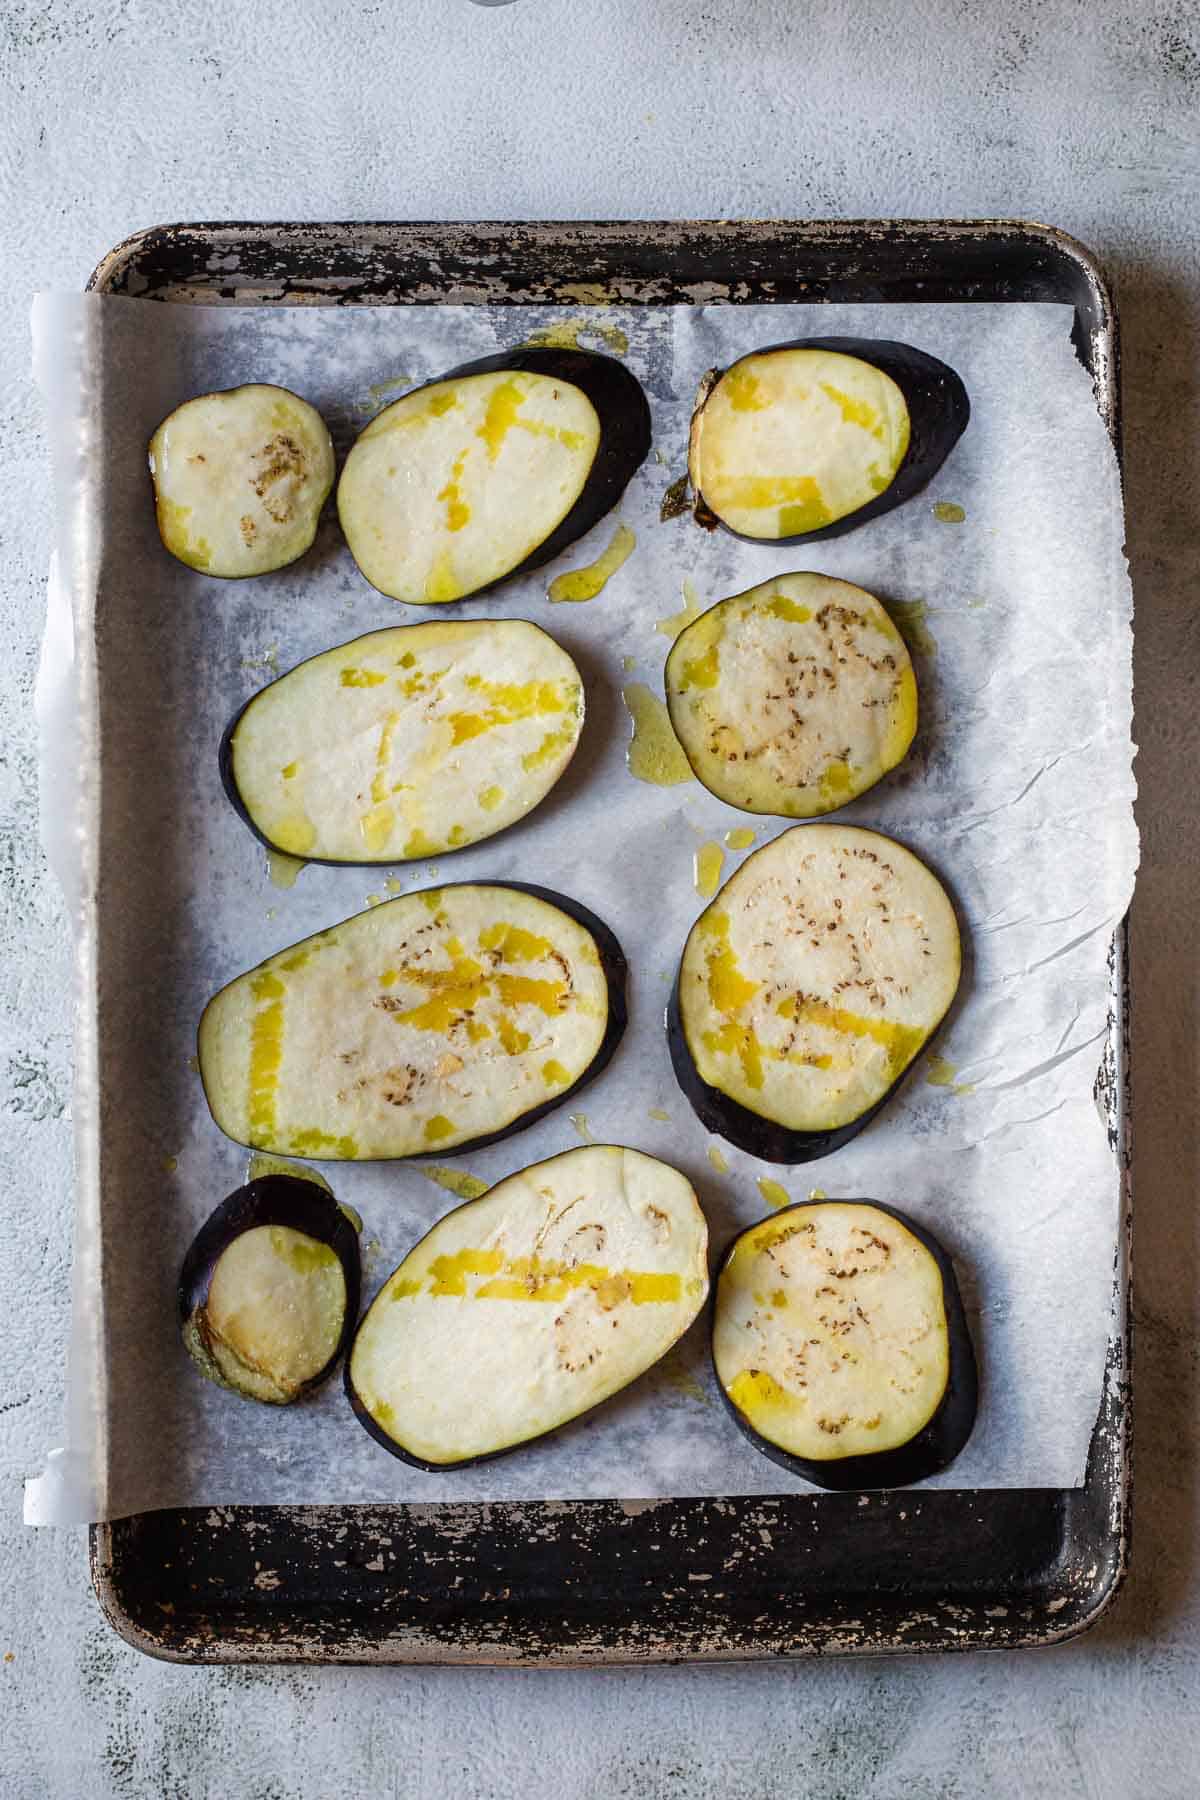 Sliced eggplants on a baking sheet with olive oil.